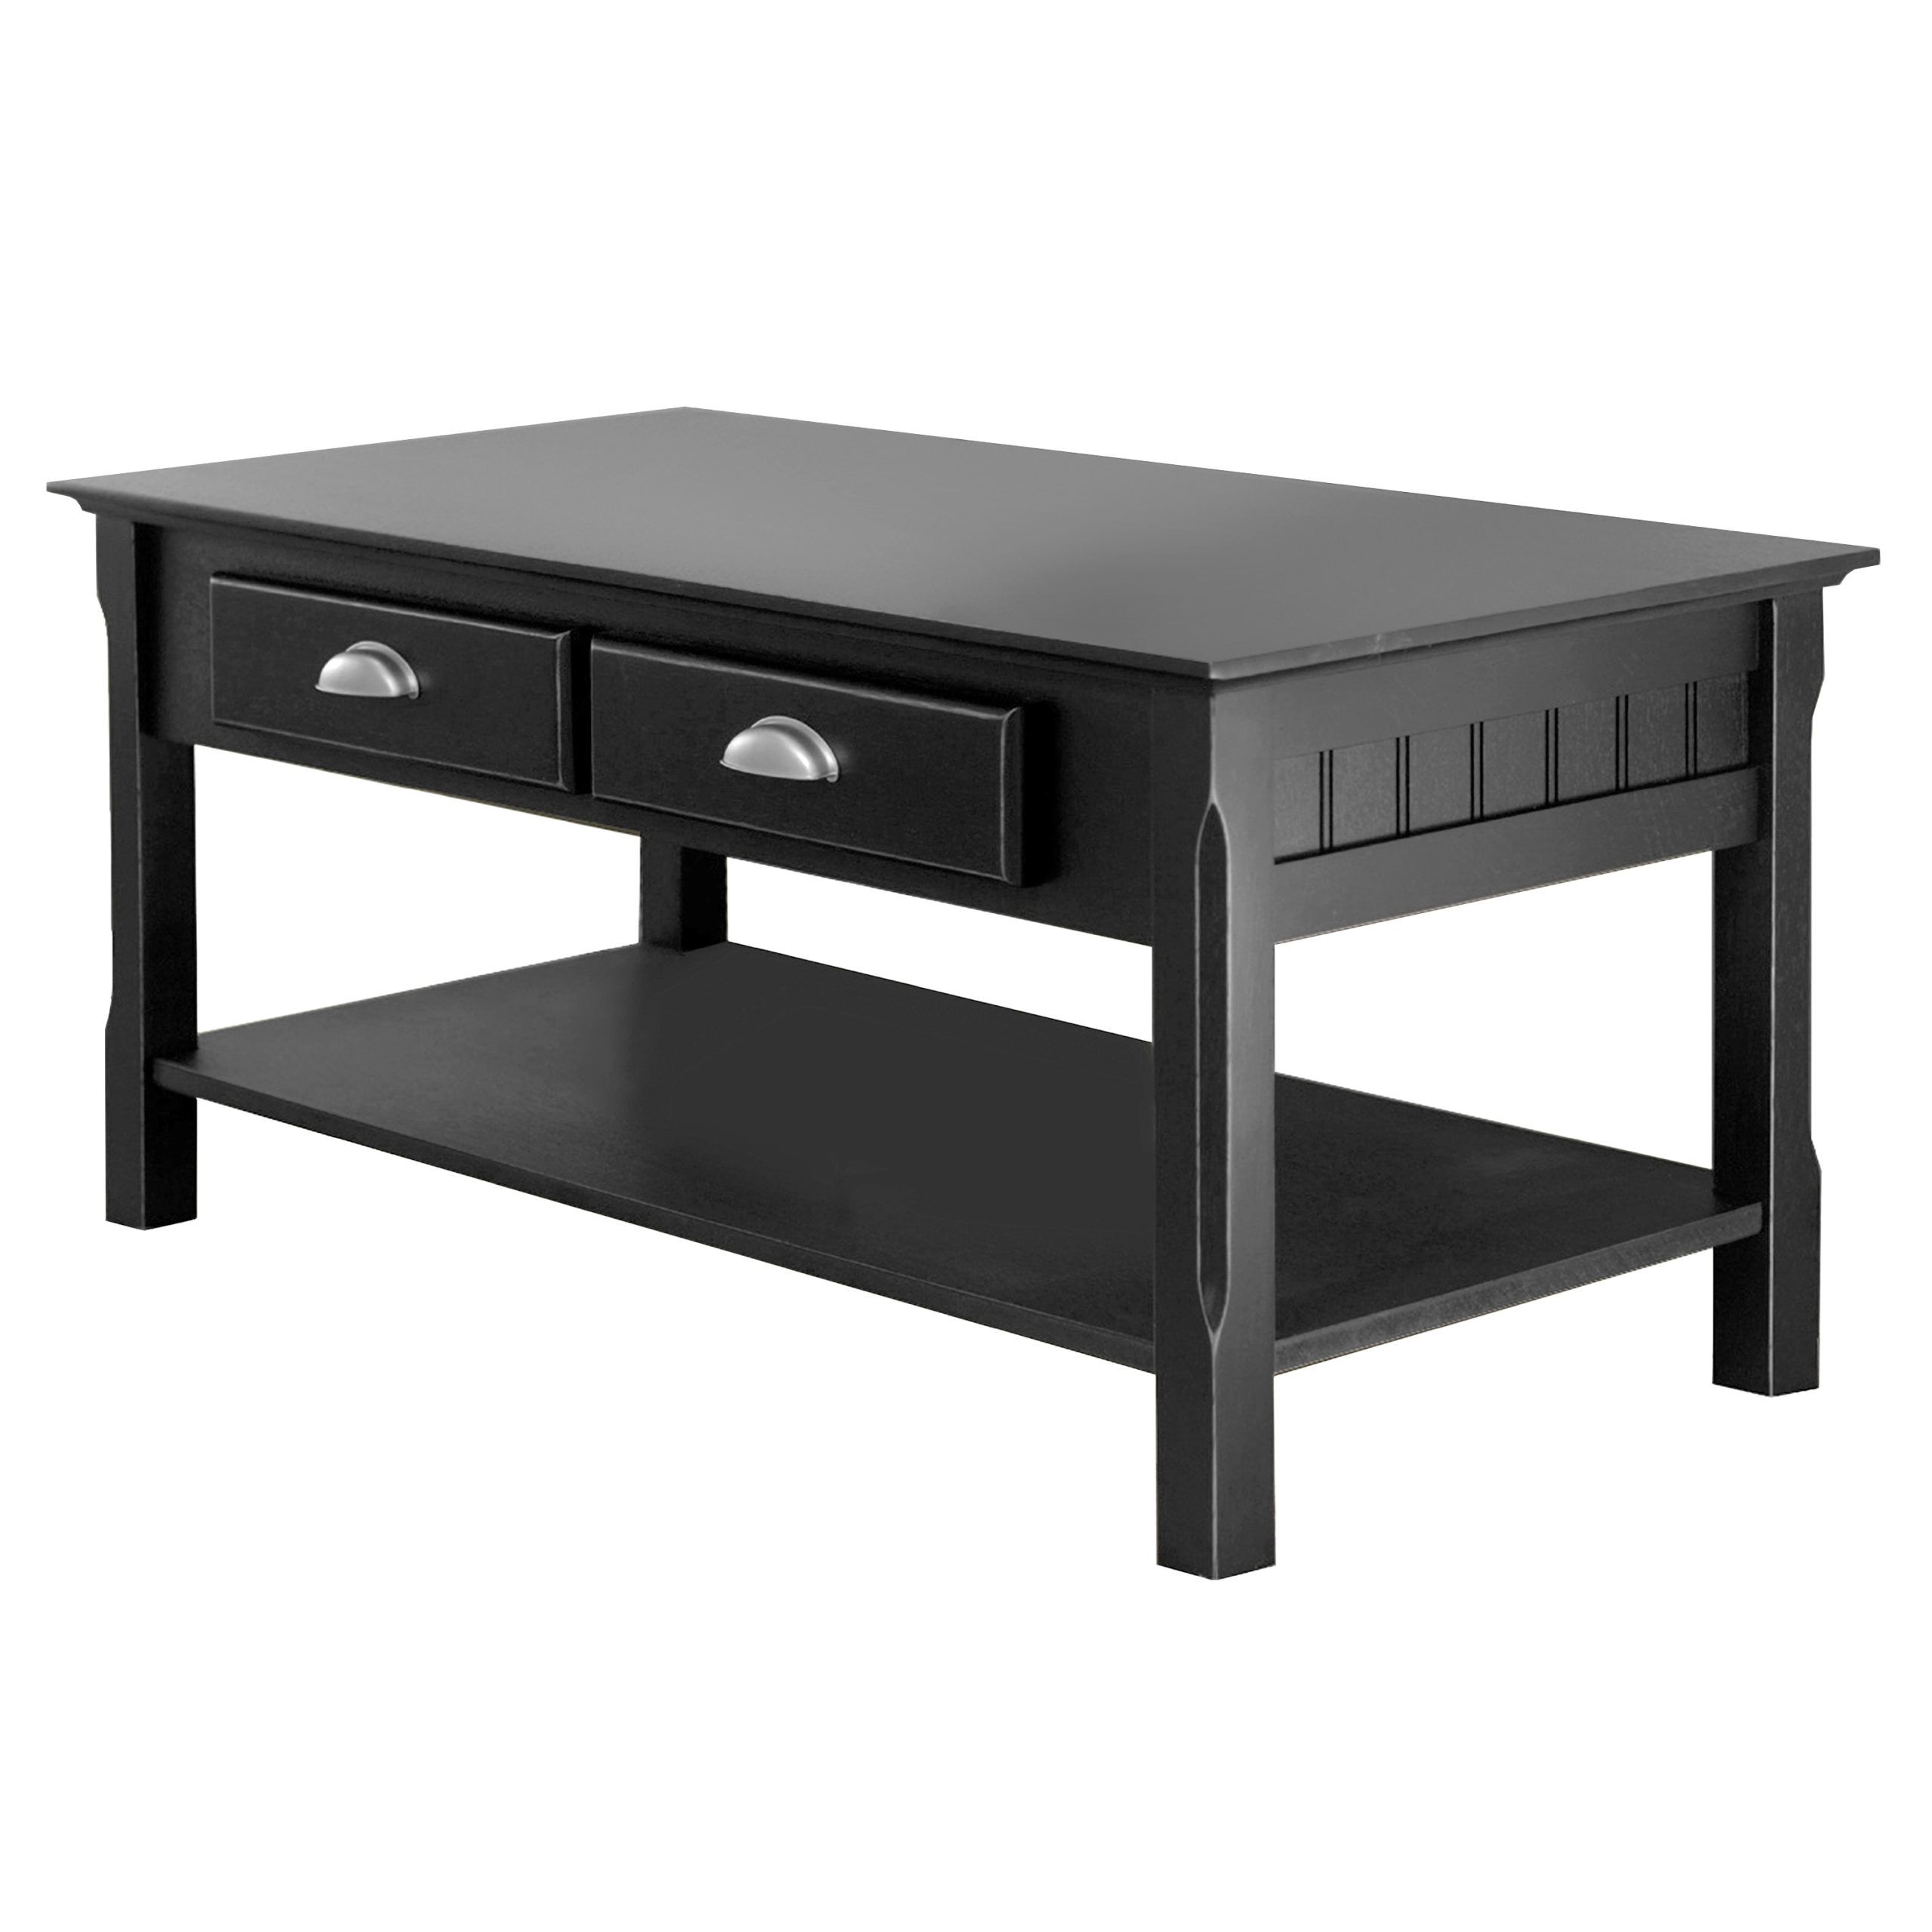 Black Wood Coffee Tables At Lowes Intended For Pemberly Row Replicated Wood Coffee Tables (Gallery 11 of 20)